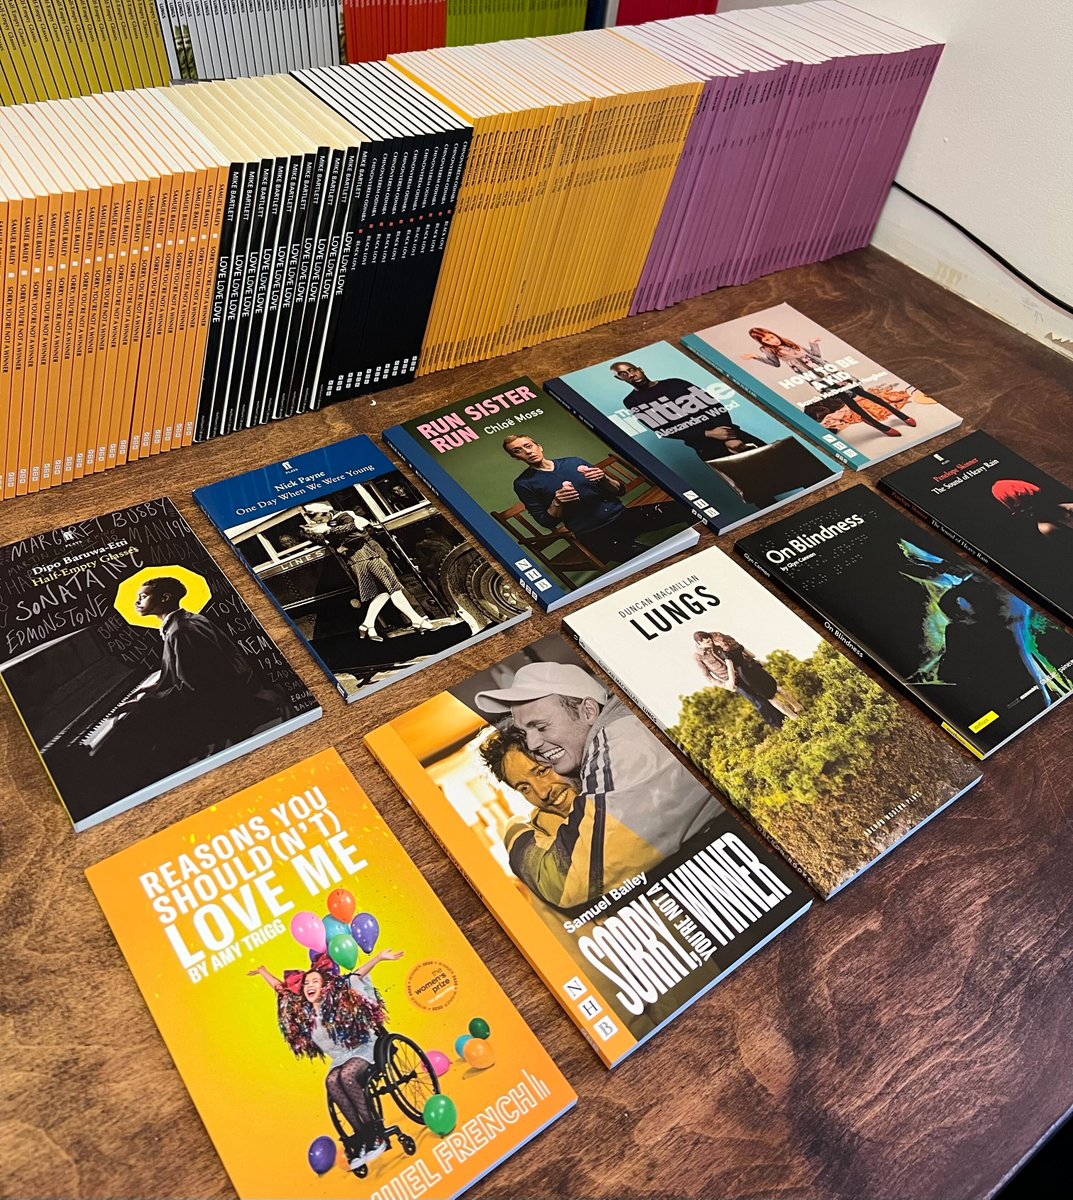 Hiii theatre companies, schools, clubs, community groups. We're downsizing our office library and we want to upsize yours 📚 If you’d like a small box containing a selection of Paines Plough plays, please fill out this form (you just need to pay postage): bit.ly/3wqM0Iv